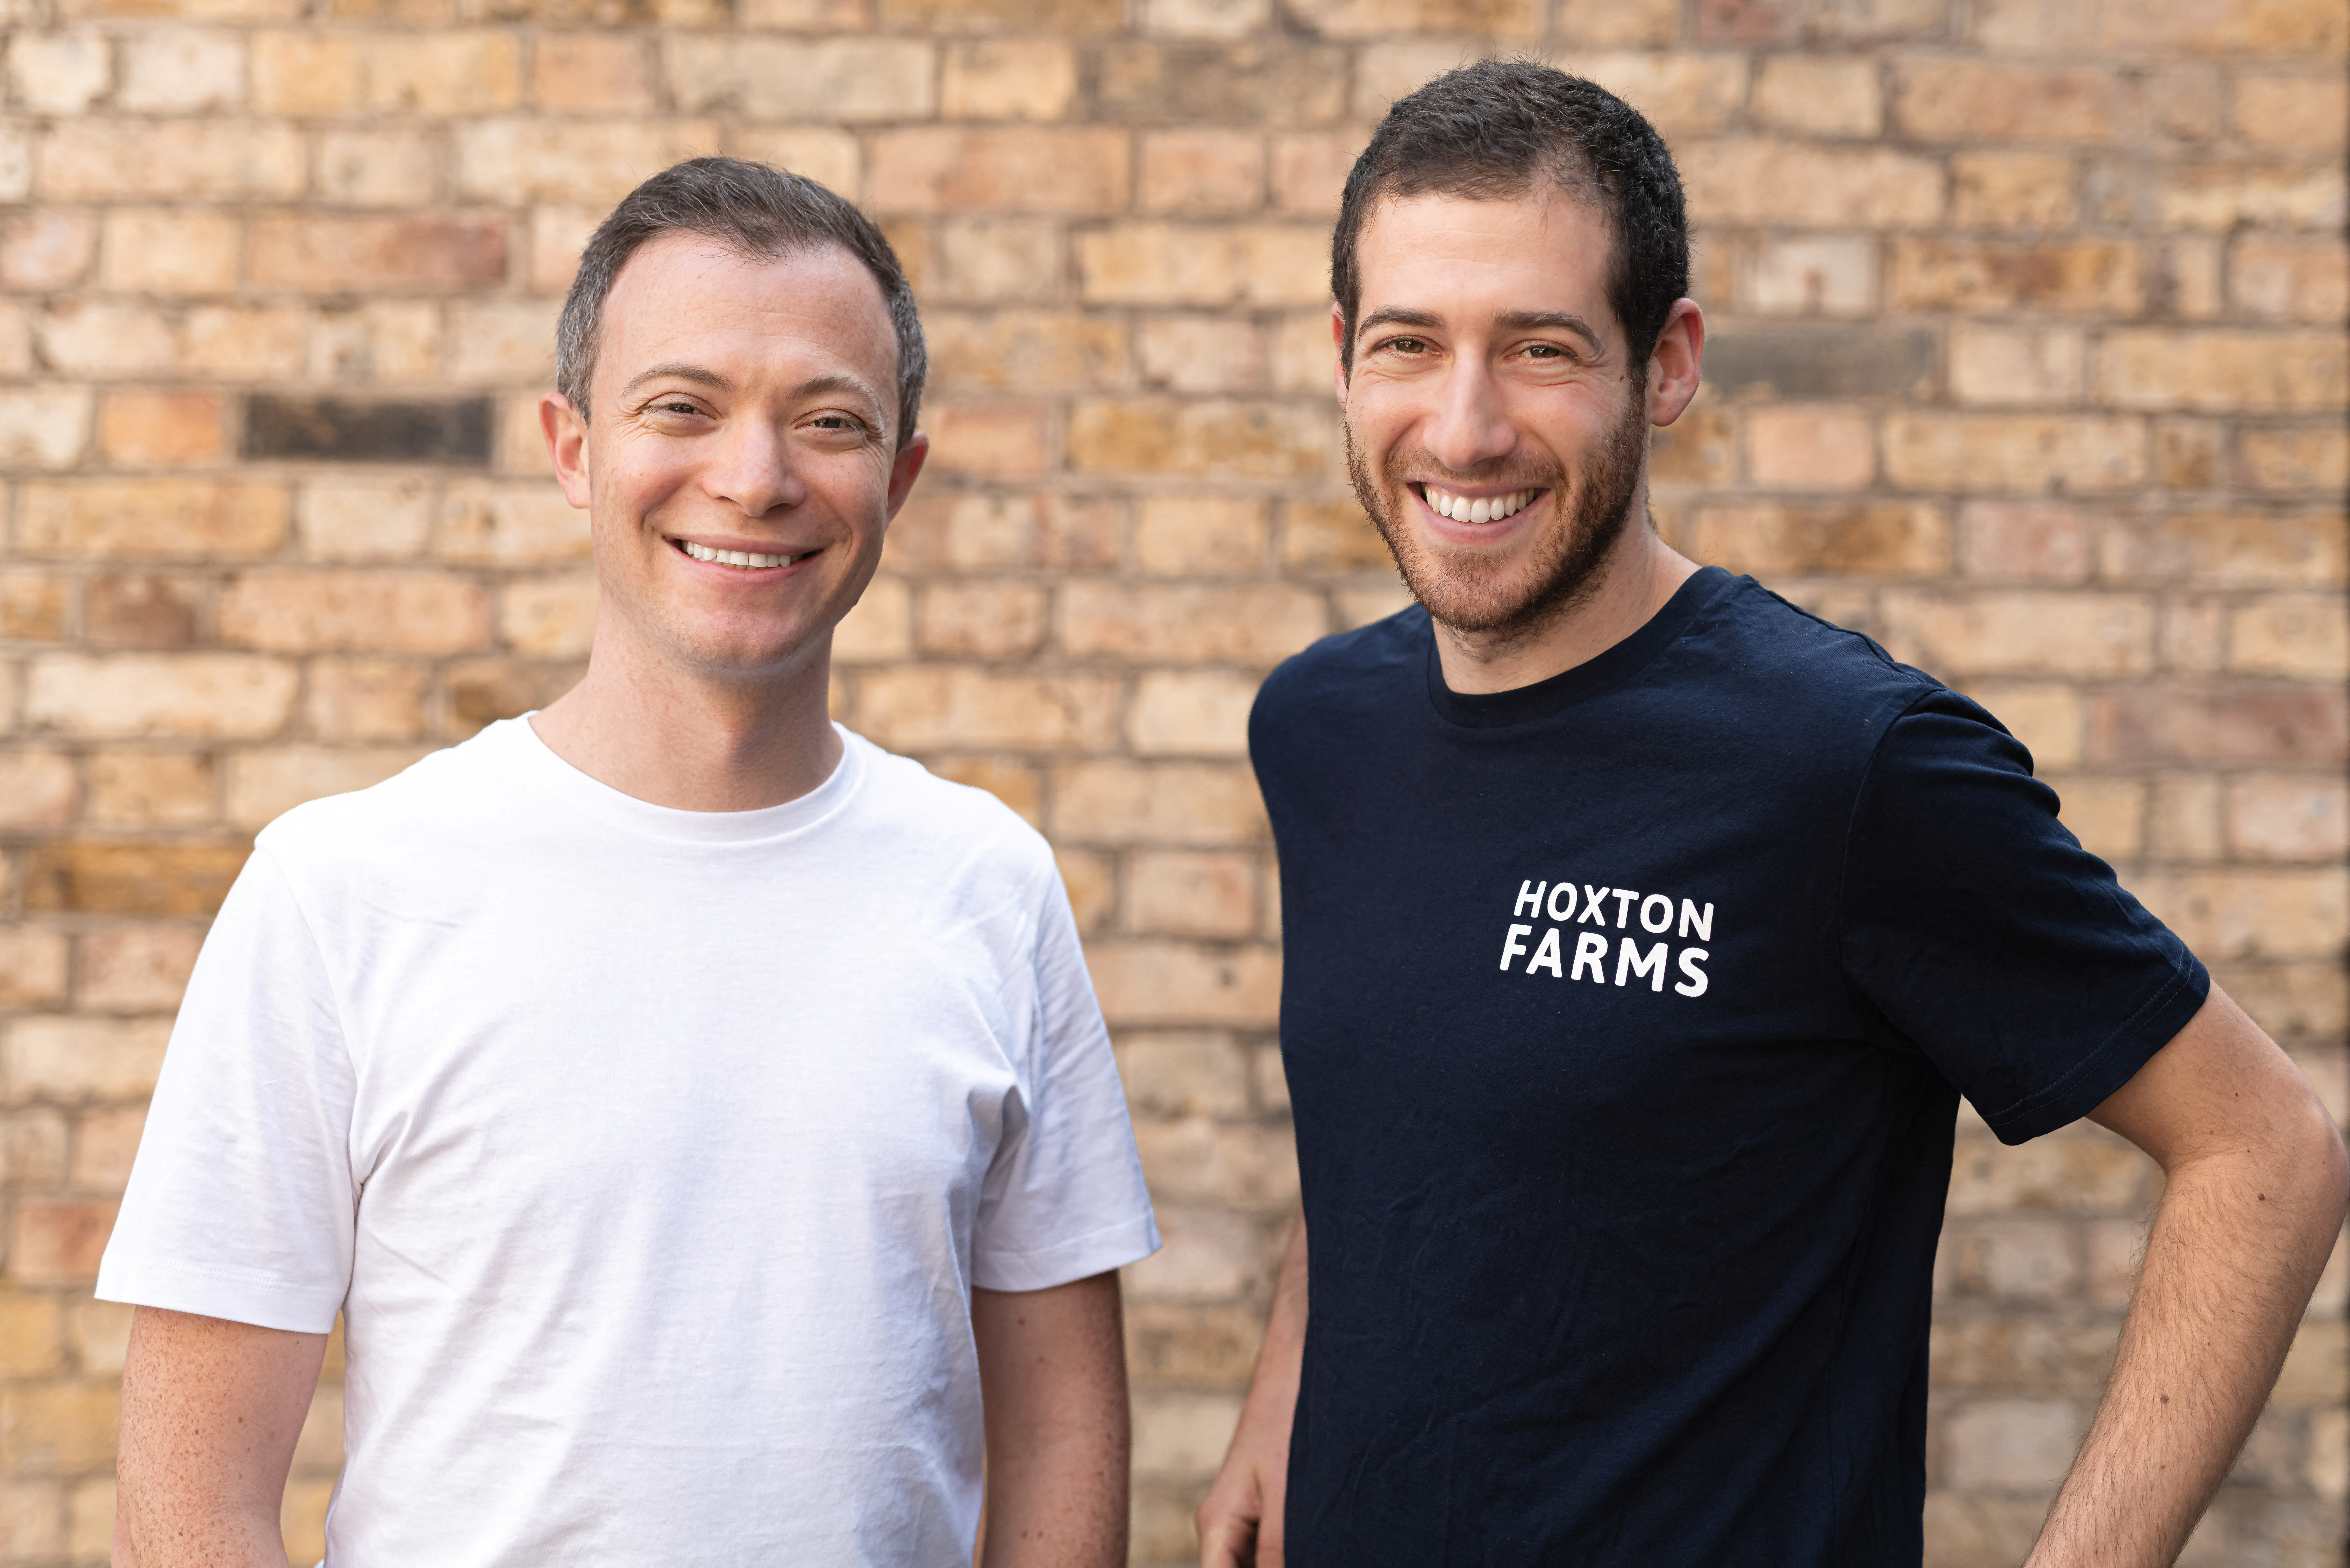 Hoxton Farms founders Max Jamilly and Ed Steele pose for a photo, in London